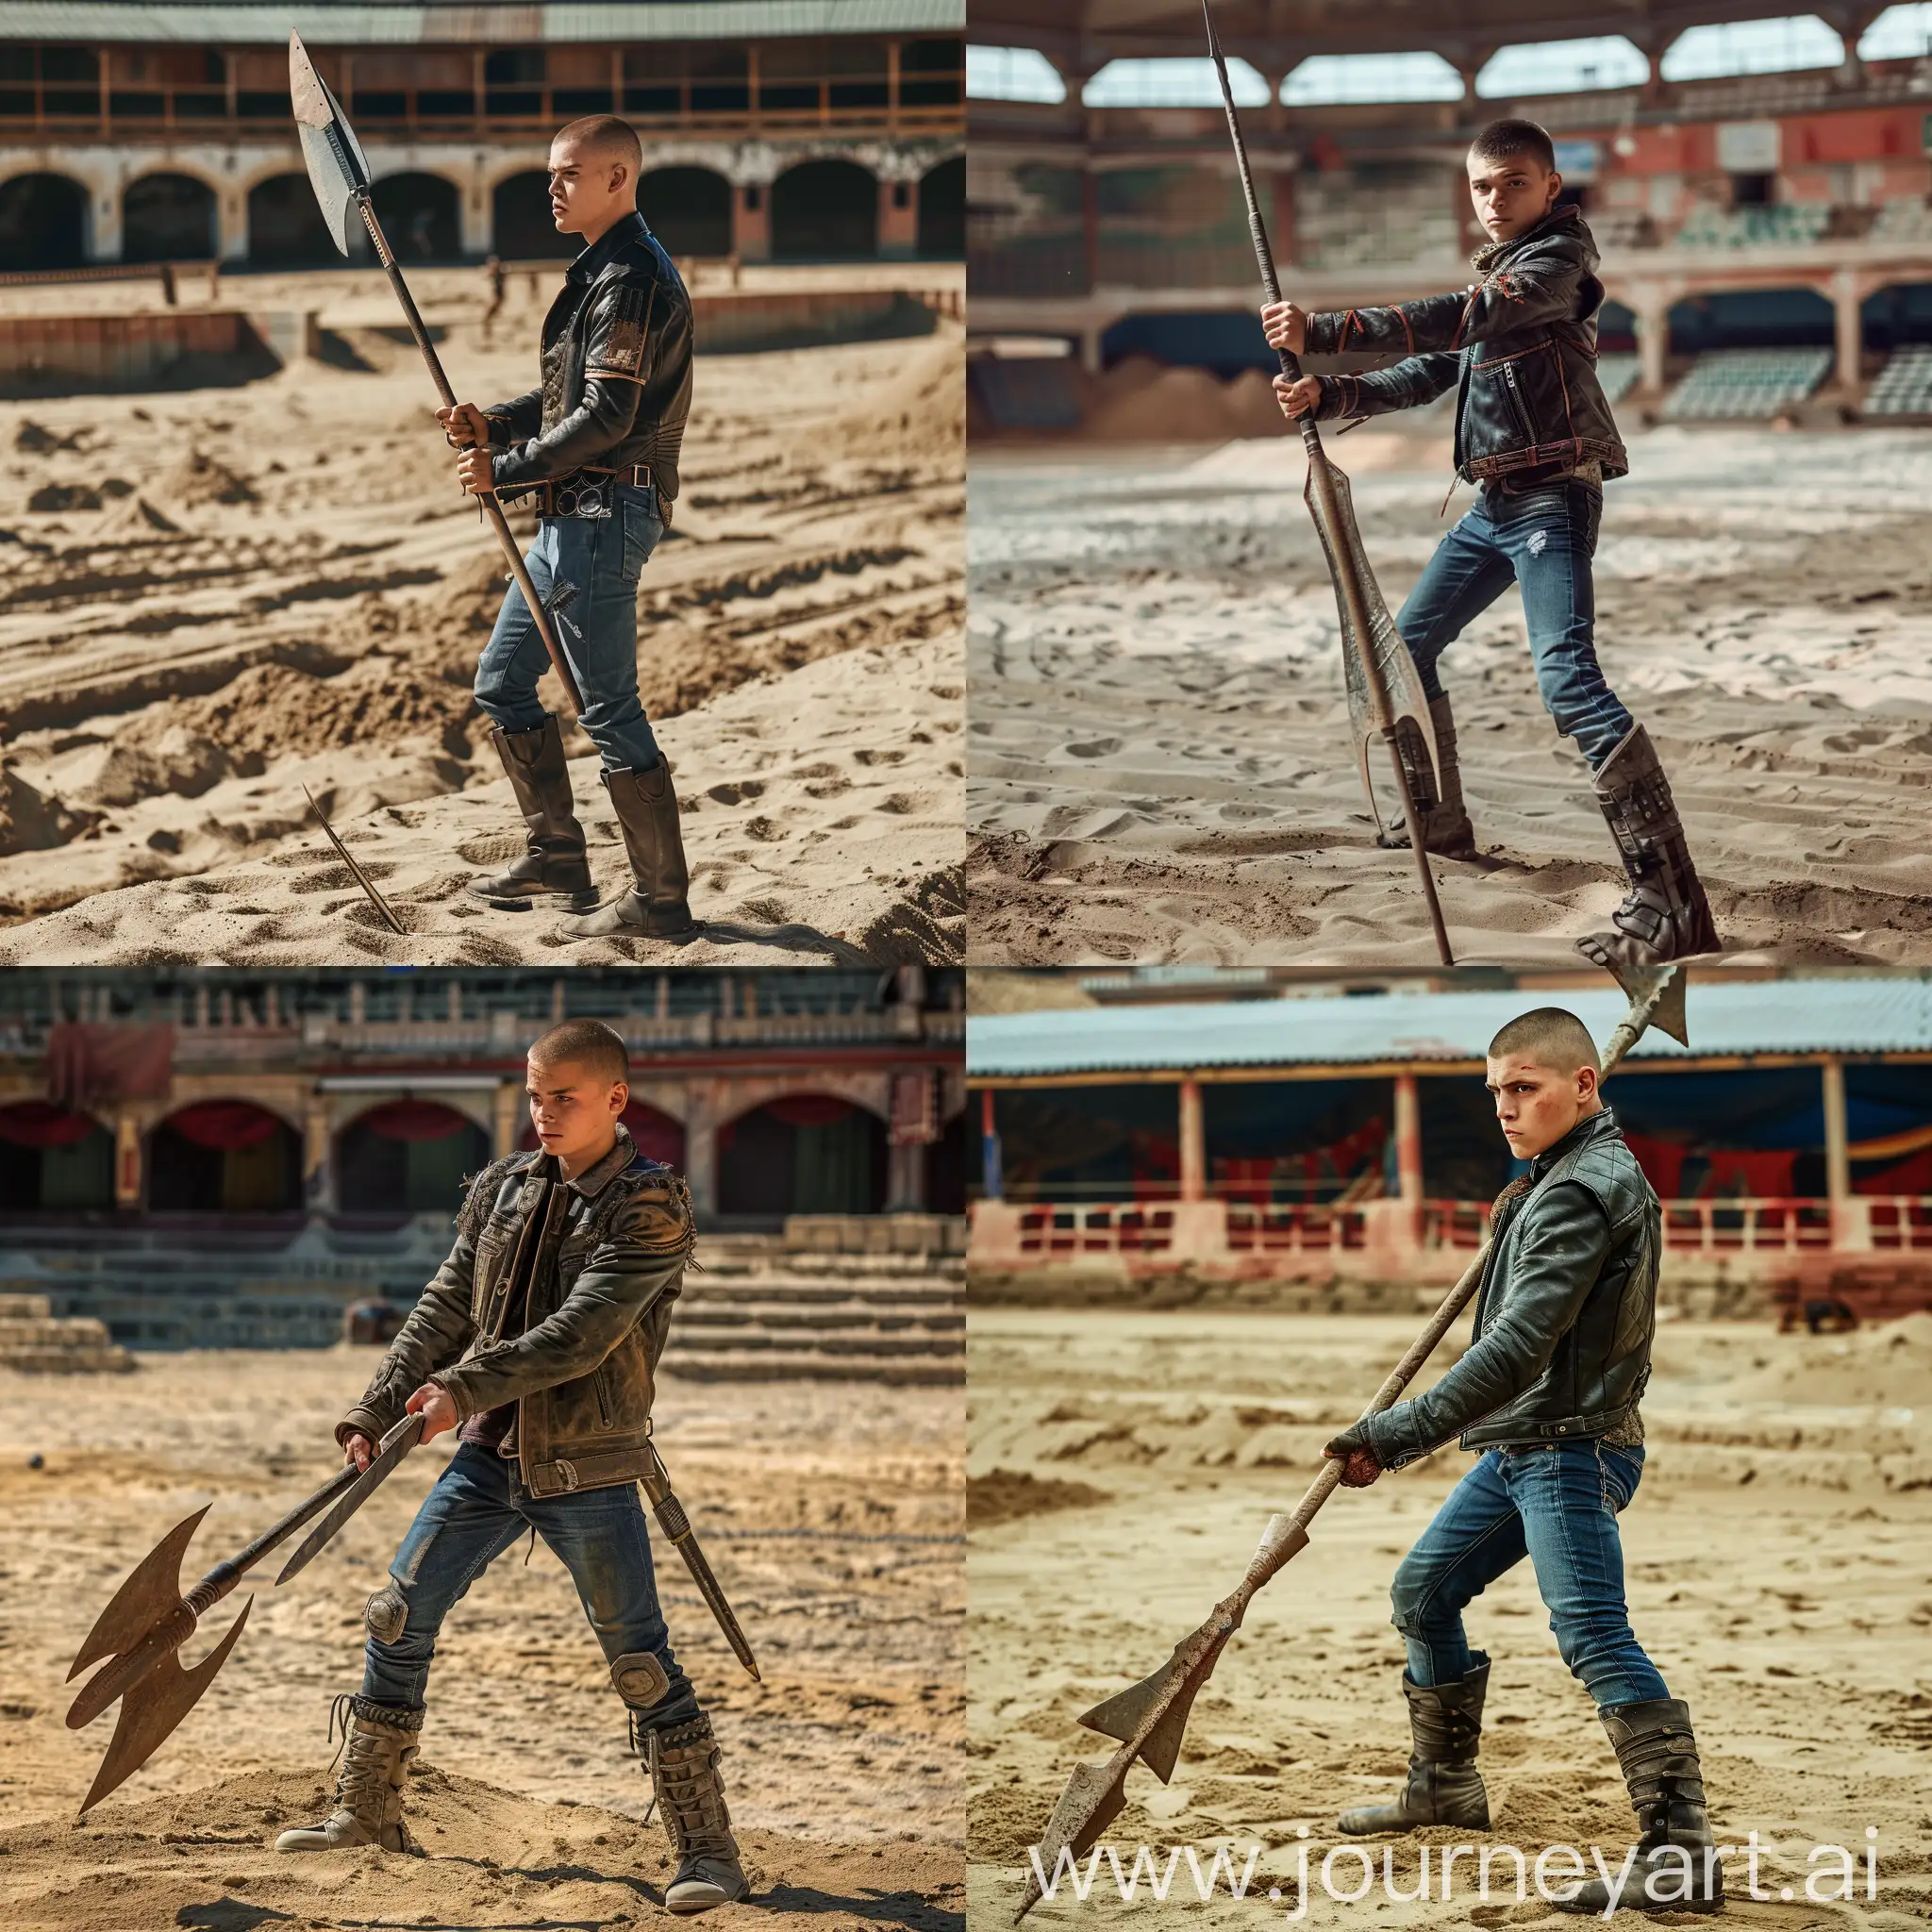 Young-Man-in-Leather-Jacket-with-Spear-in-Sandy-Arena